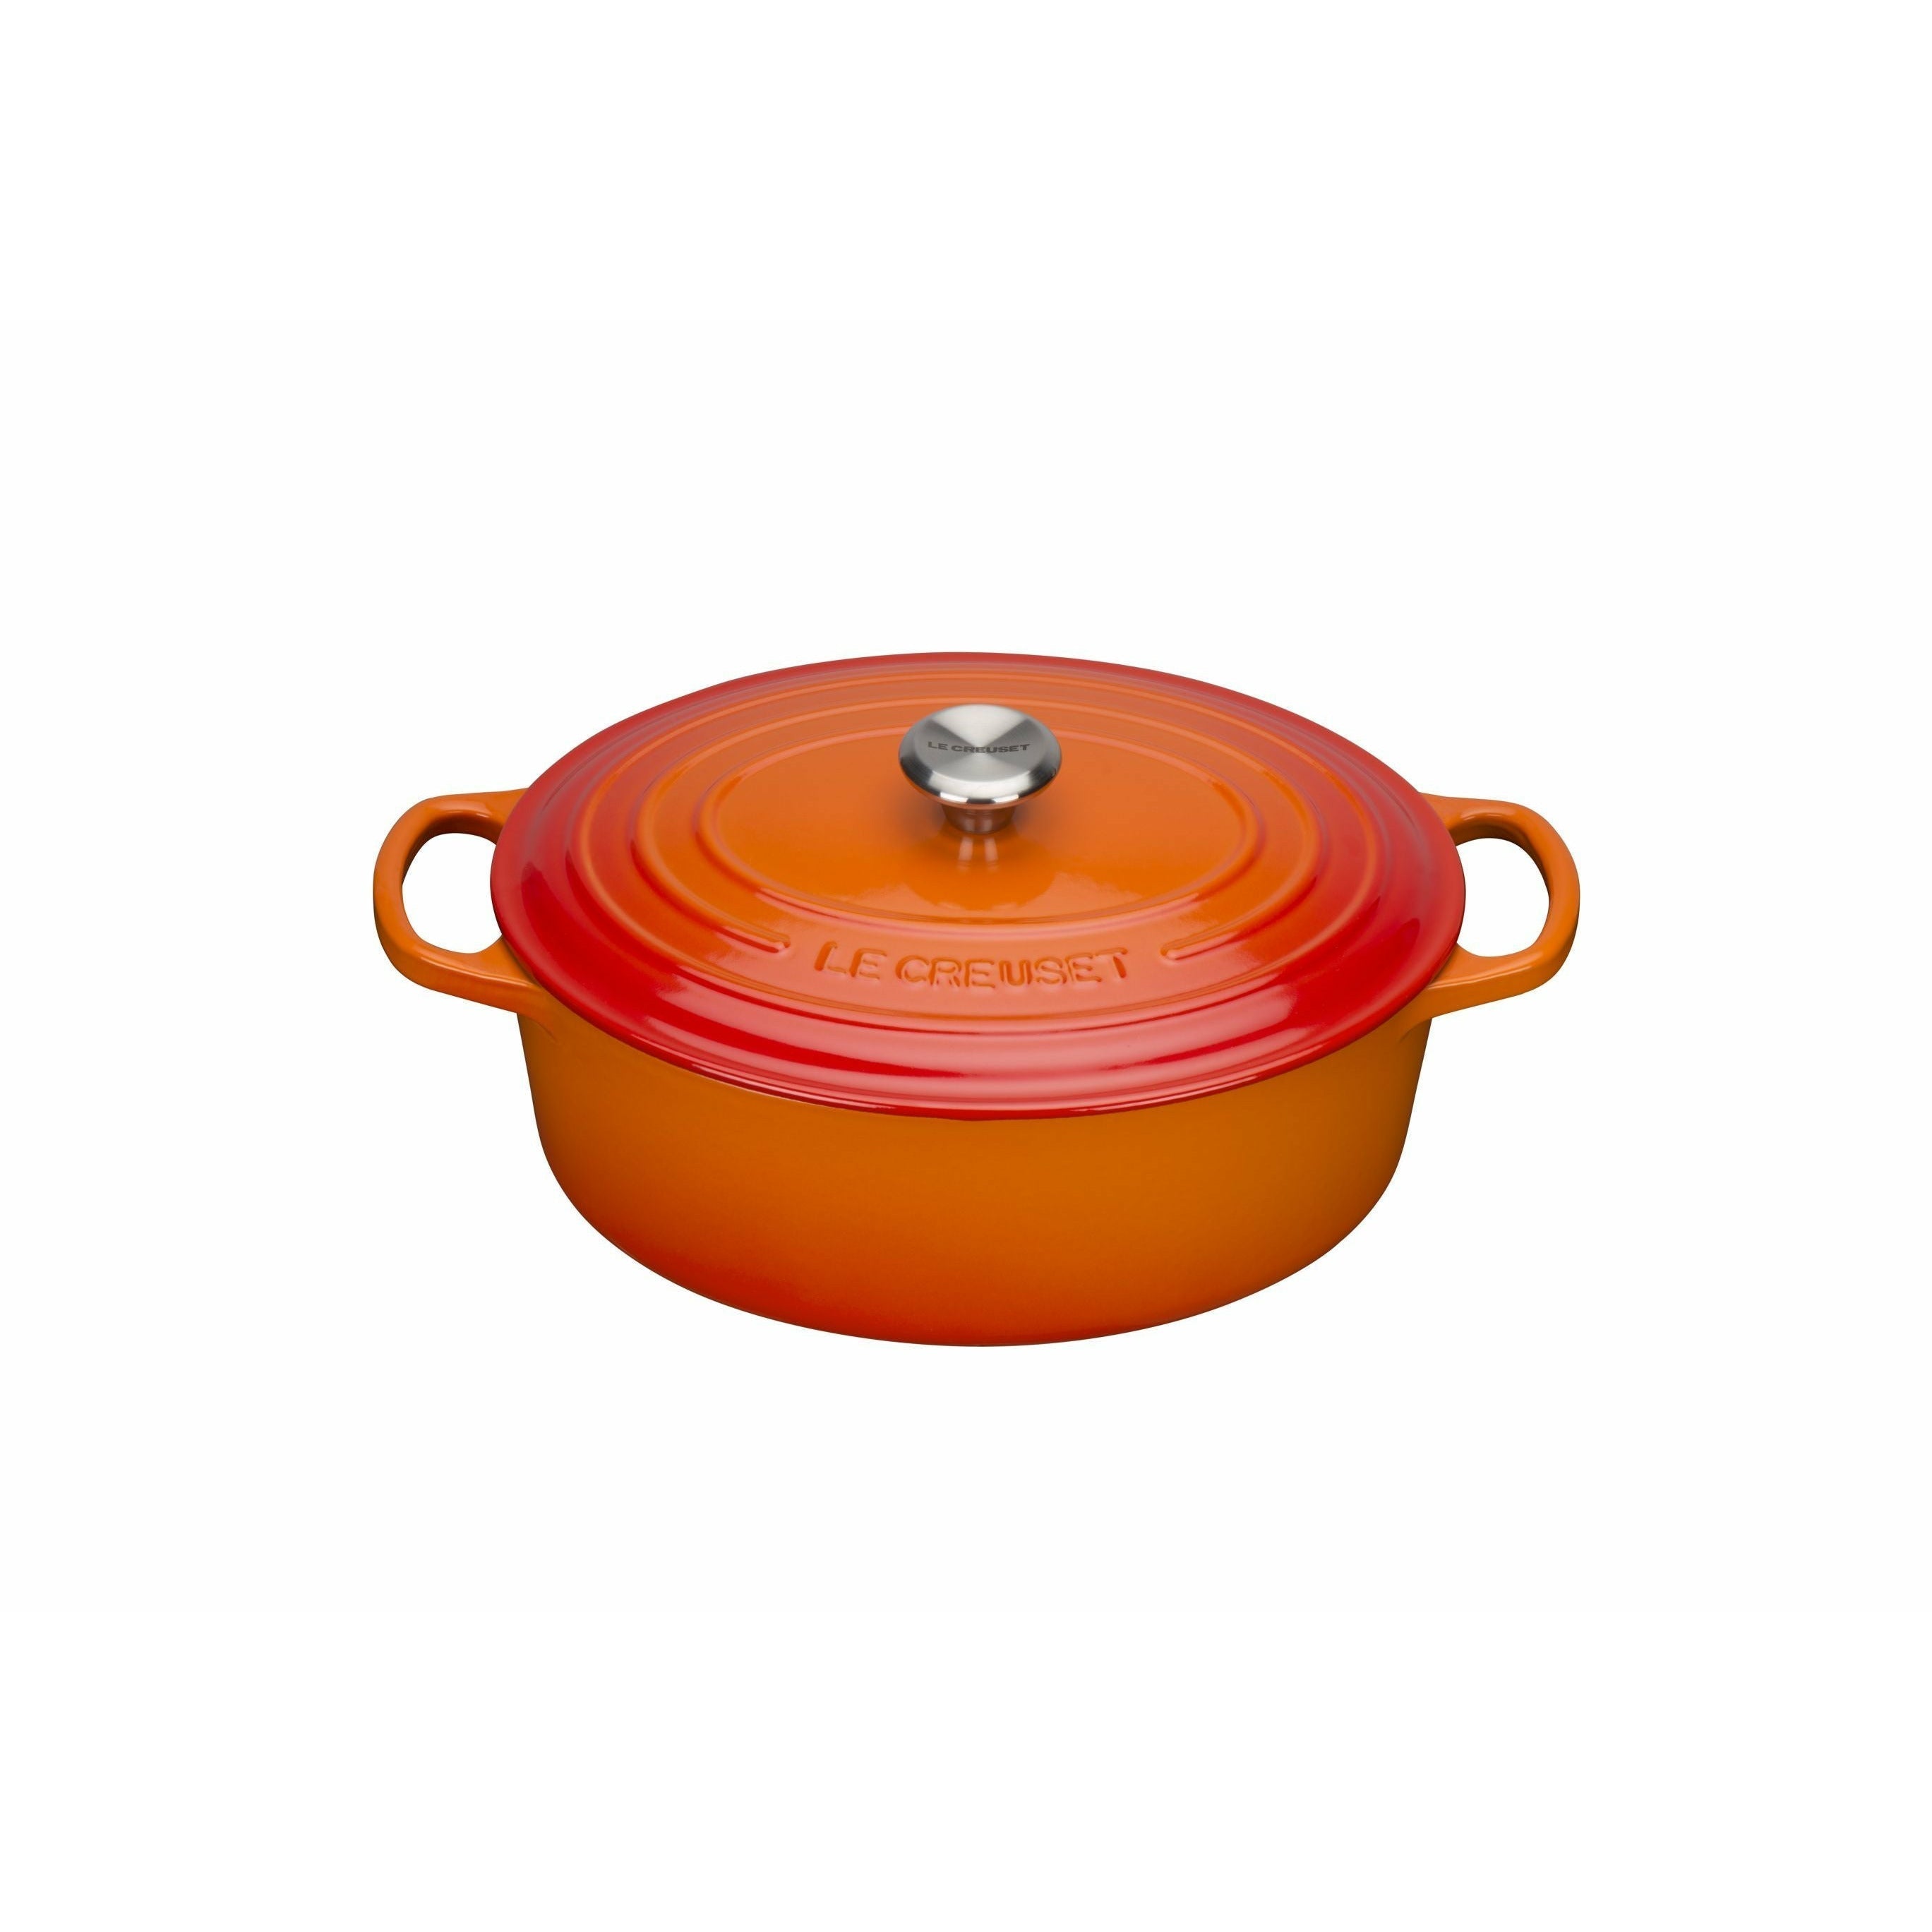 Le Creuset Signature Oval Roaster 27 Cm, Oven Red